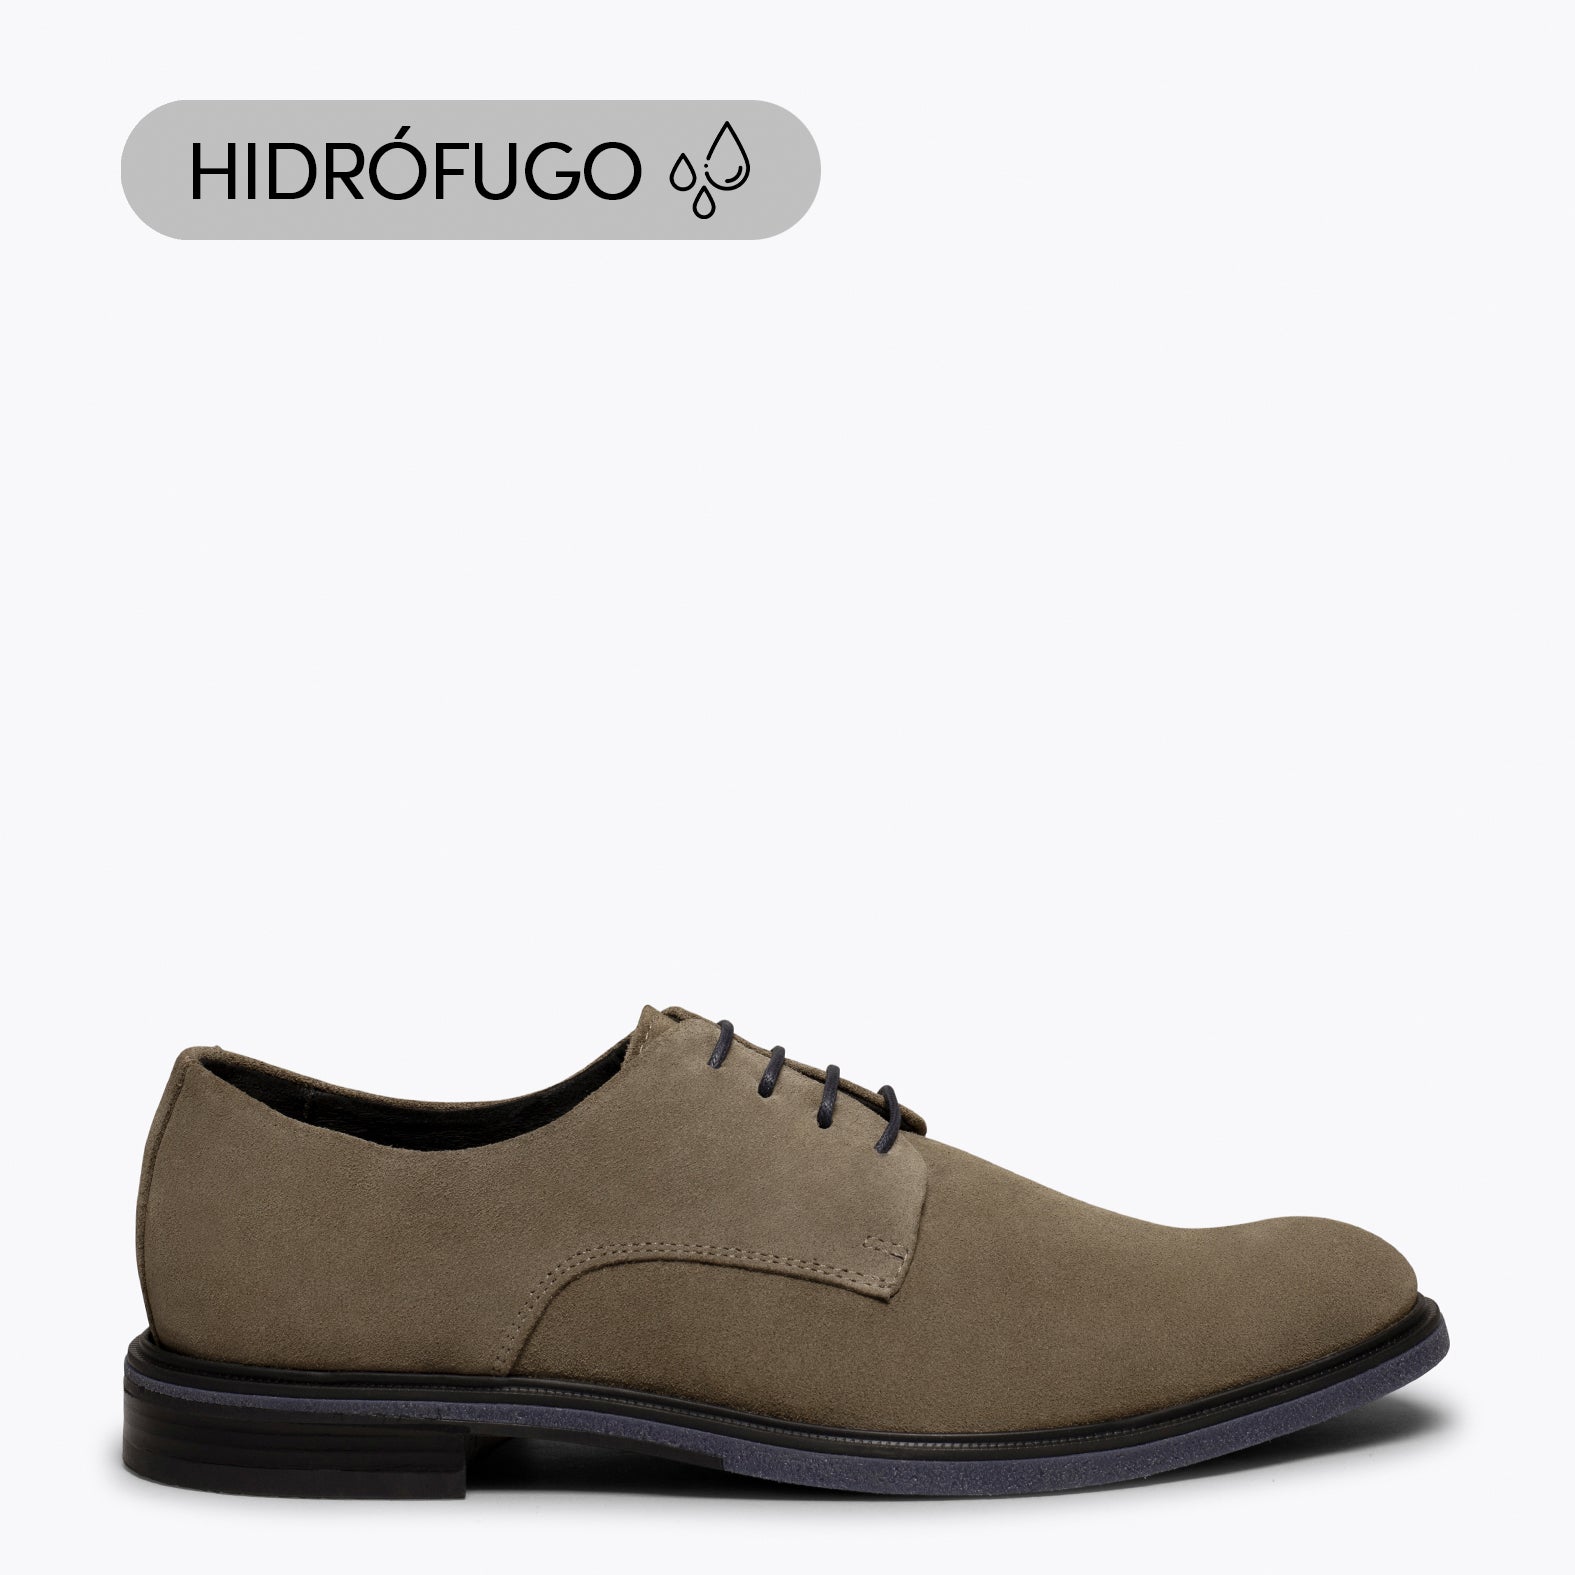 HARVARD - Chaussure pour homme TAUPE hydrofuge